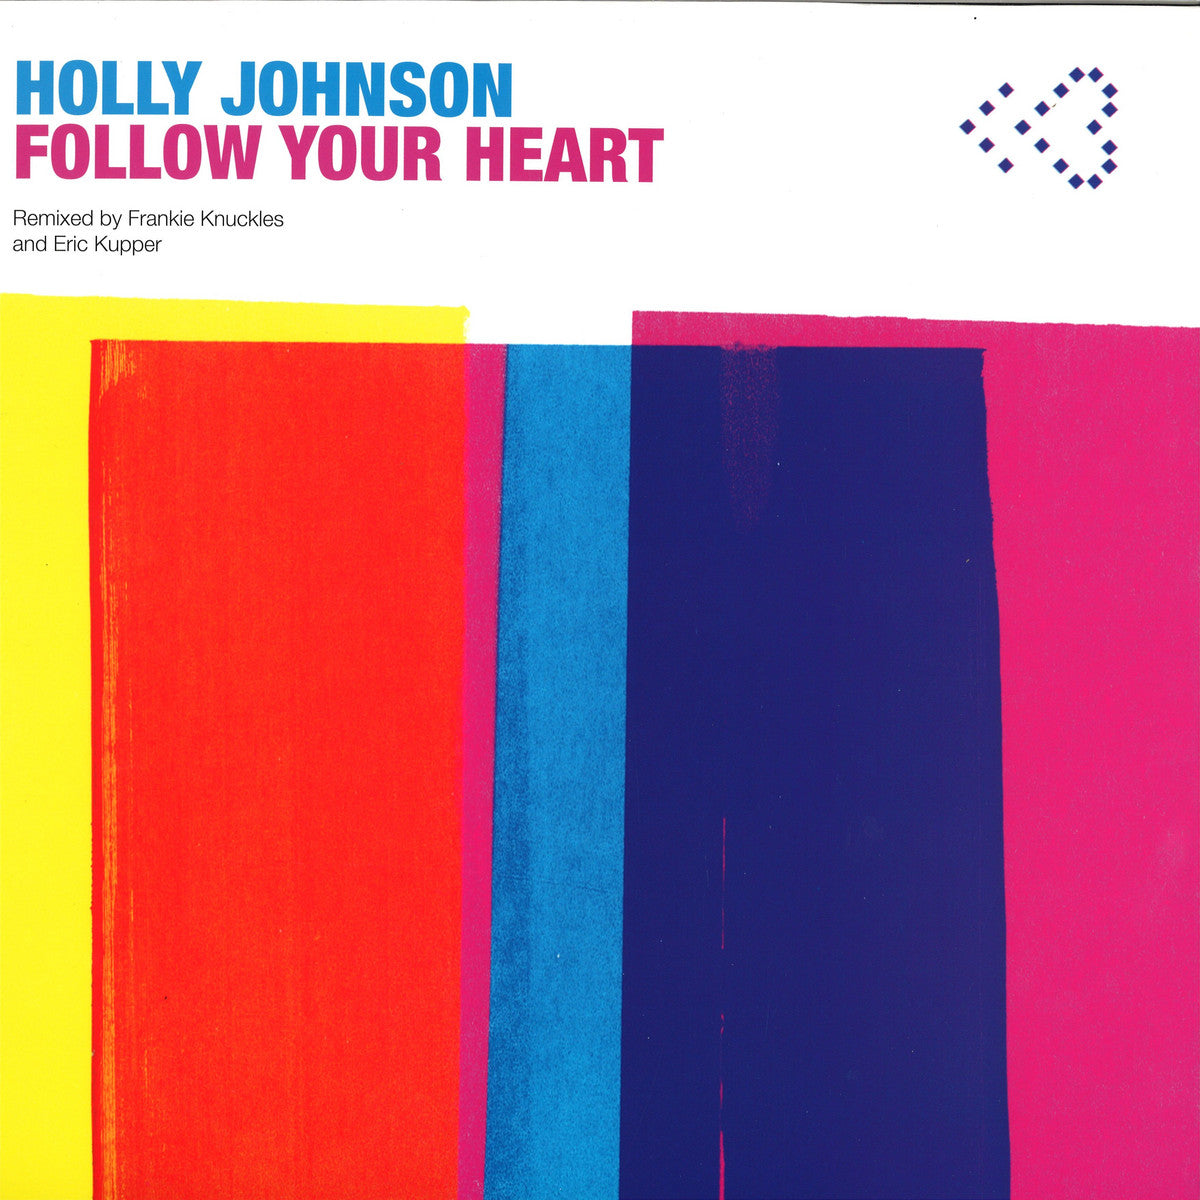 Holly Johnson - Follow Your Heart (Fankie Knuckles & Eric Kupper Director's Cut Signature Mix)